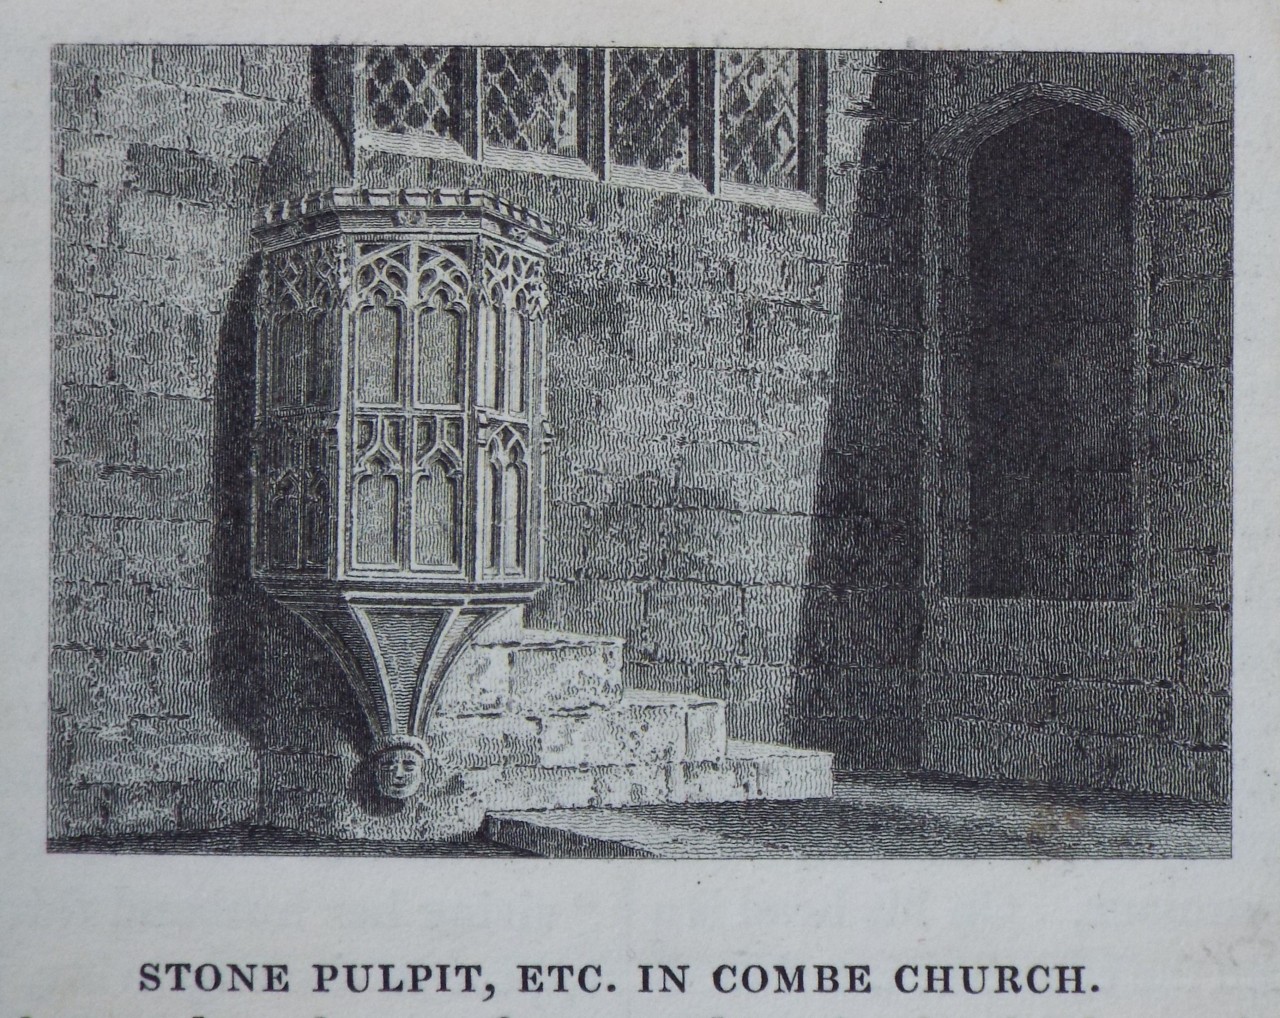 Print - Stone Pulpit, etc. in Combe Church.